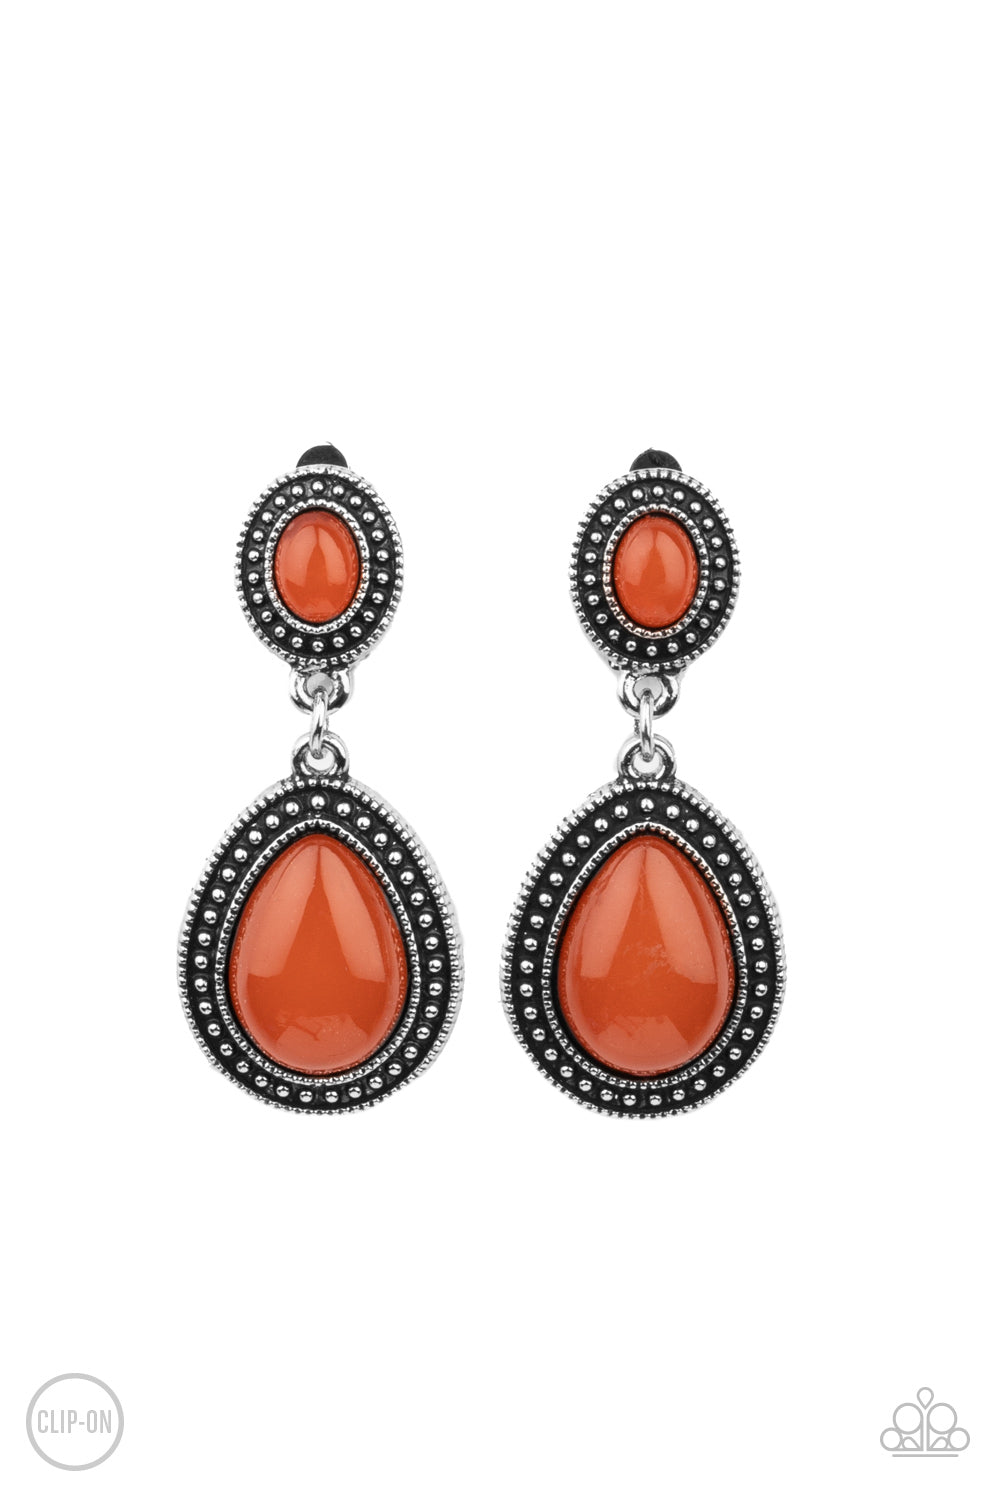 Carefree Clairvoyance - orange - Paparazzi CLIP ON earrings